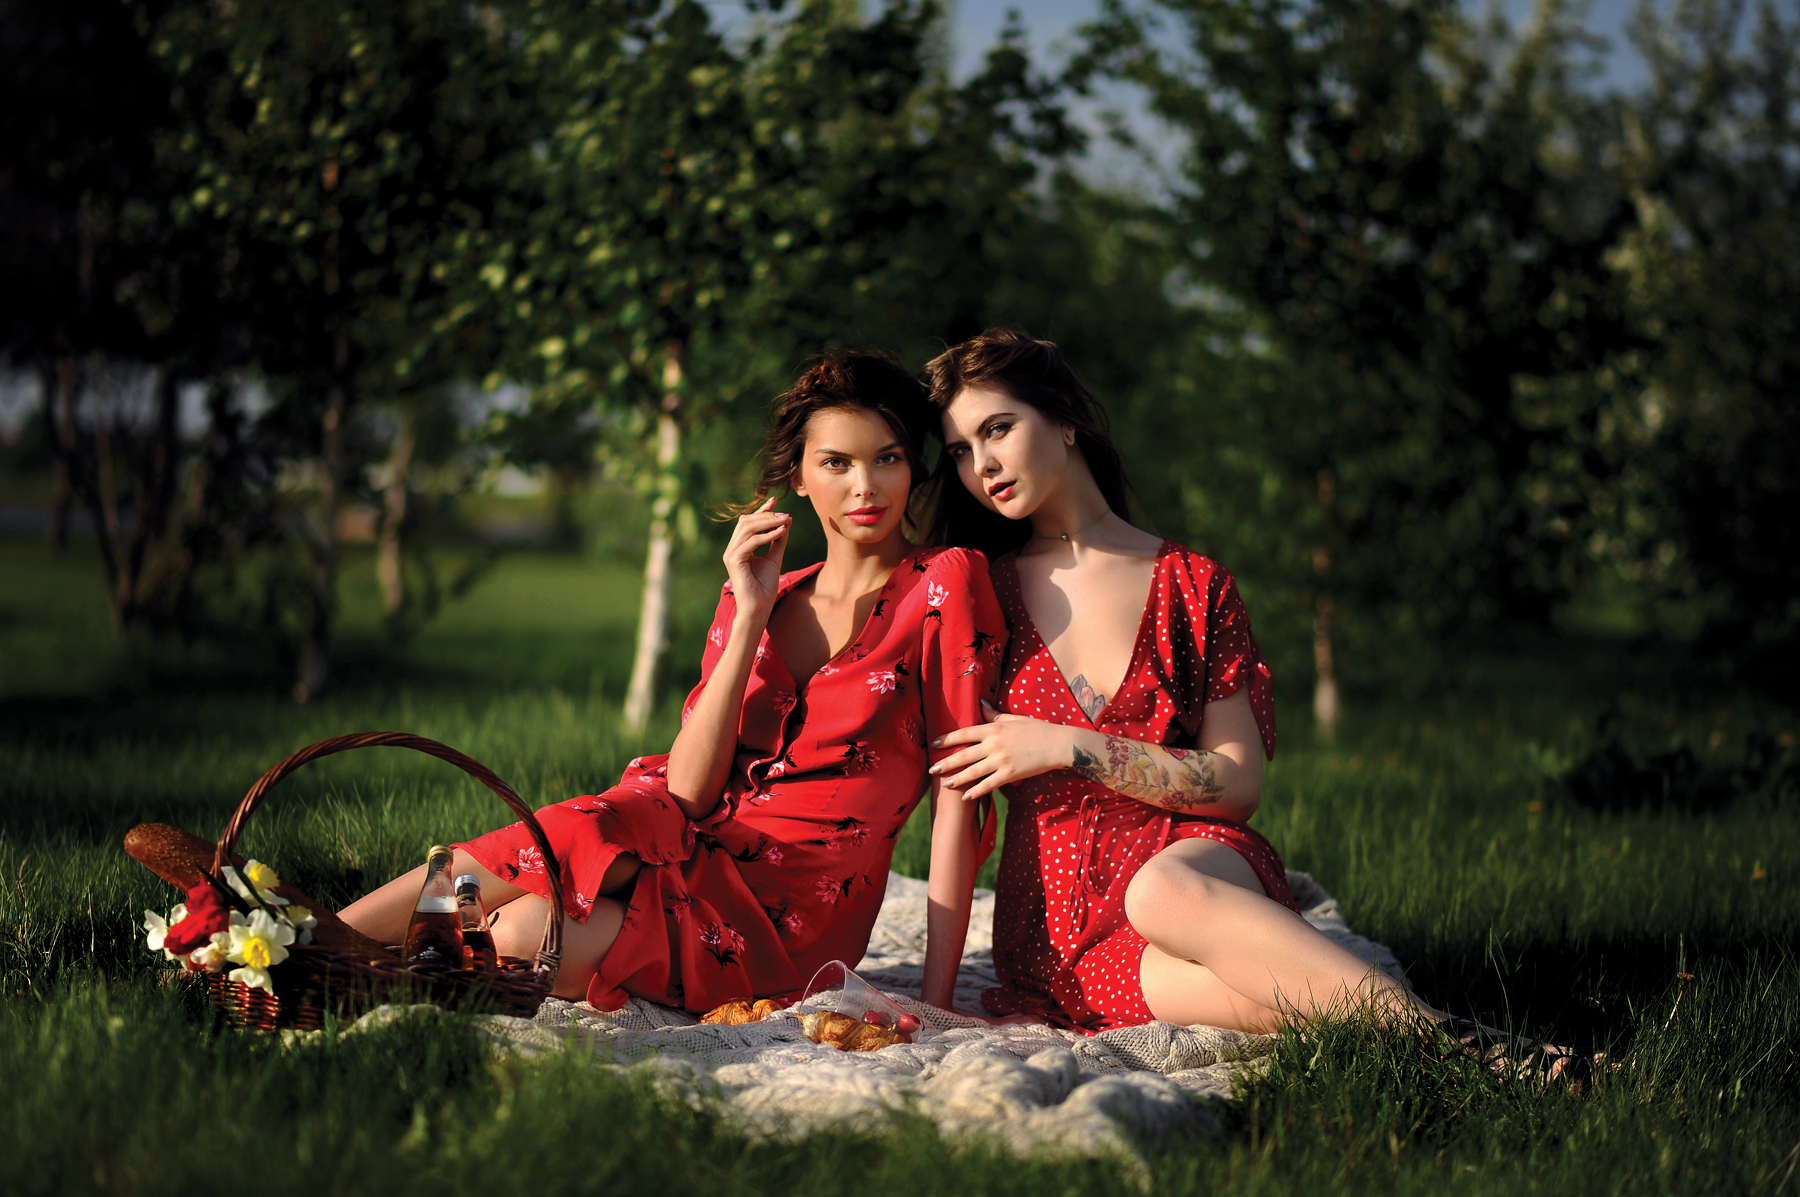 Women Model Brunette Two Women Looking At Viewer Outdoors Necklace Dress Red Dress Picnic Baskets Si 1800x1197